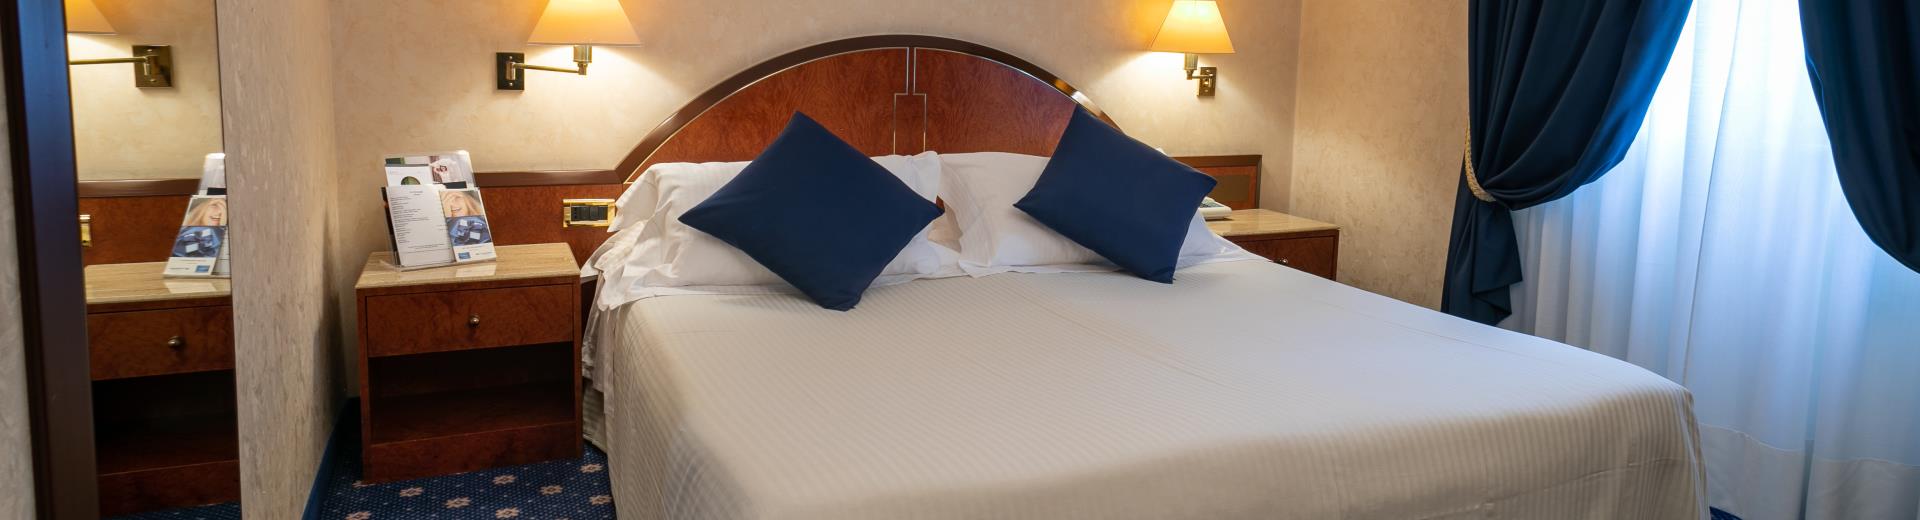 Available either double with queen size bed or twin with french beds, spacious and well-furnished with moquette, the deluxe room is ideal for those who look for maximum comfort for their stay and the relax that distinguish the Hotel Cappello D''Oro.